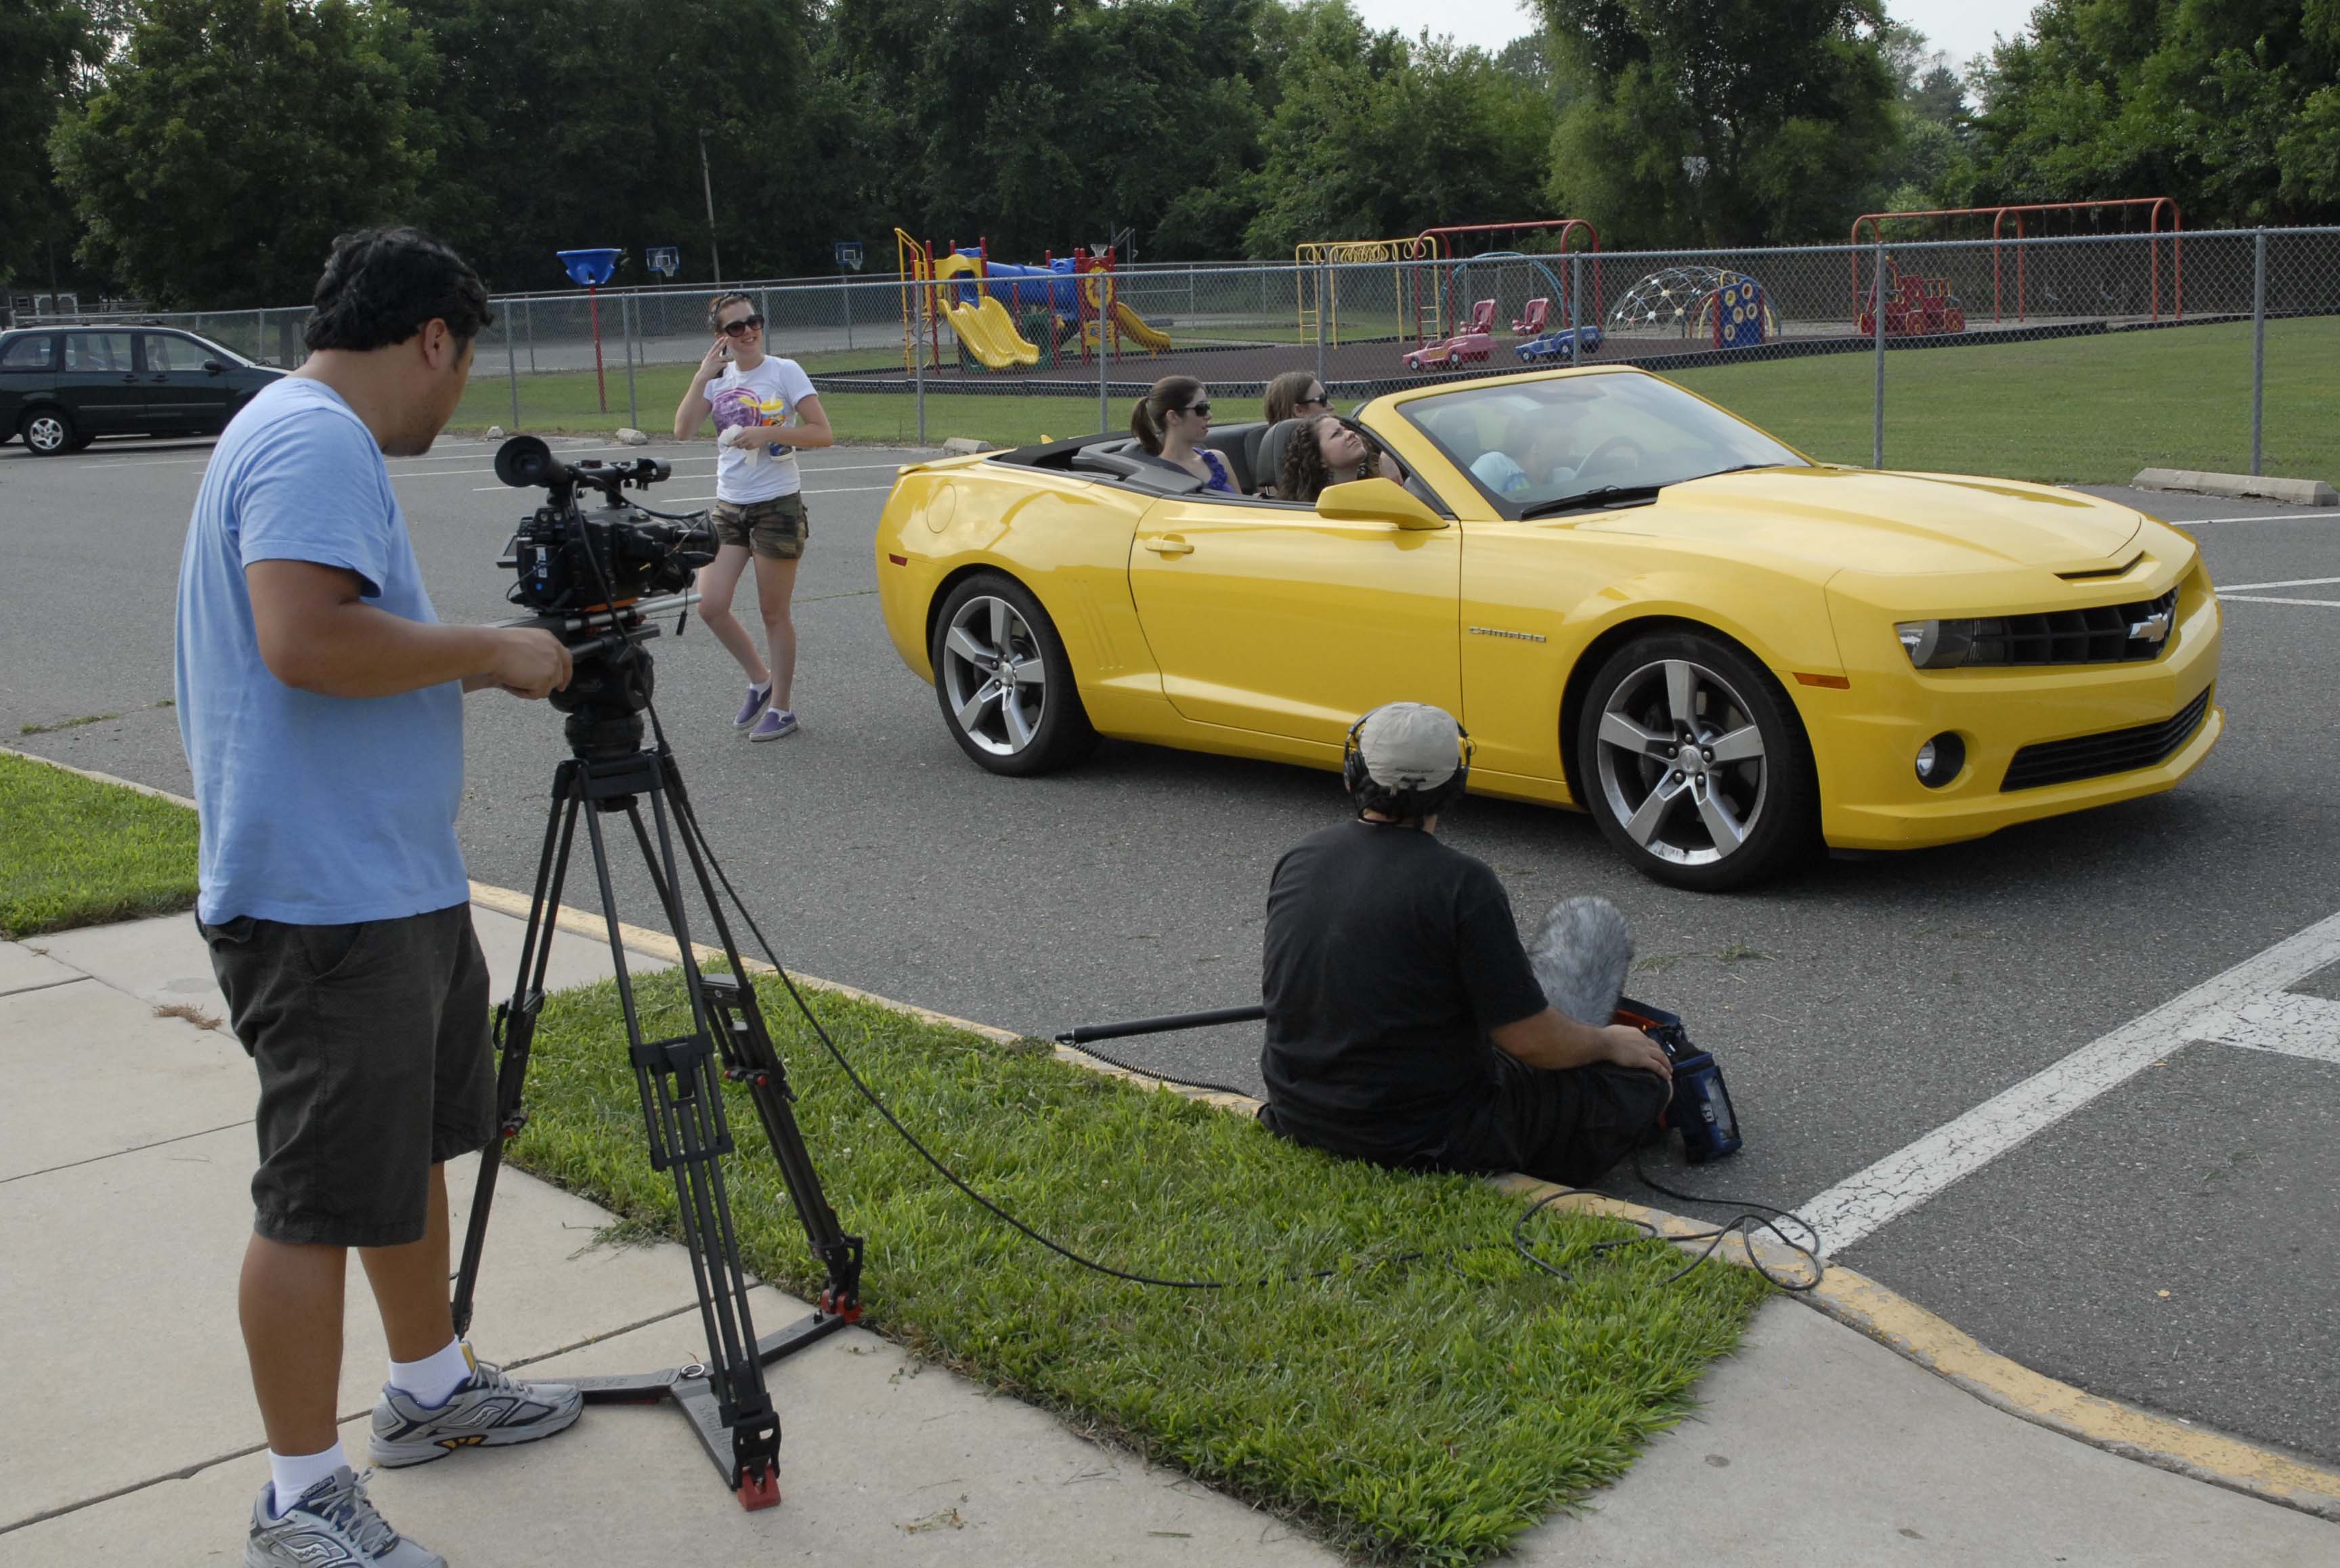 Chevy sponsored spec commerical. And the in the starring role...the 2011 Chevy Camaro!! Transform Bumblebee!!!! lol. Chevy also provided the car for the shoot. (Mt Laurel, NJ)